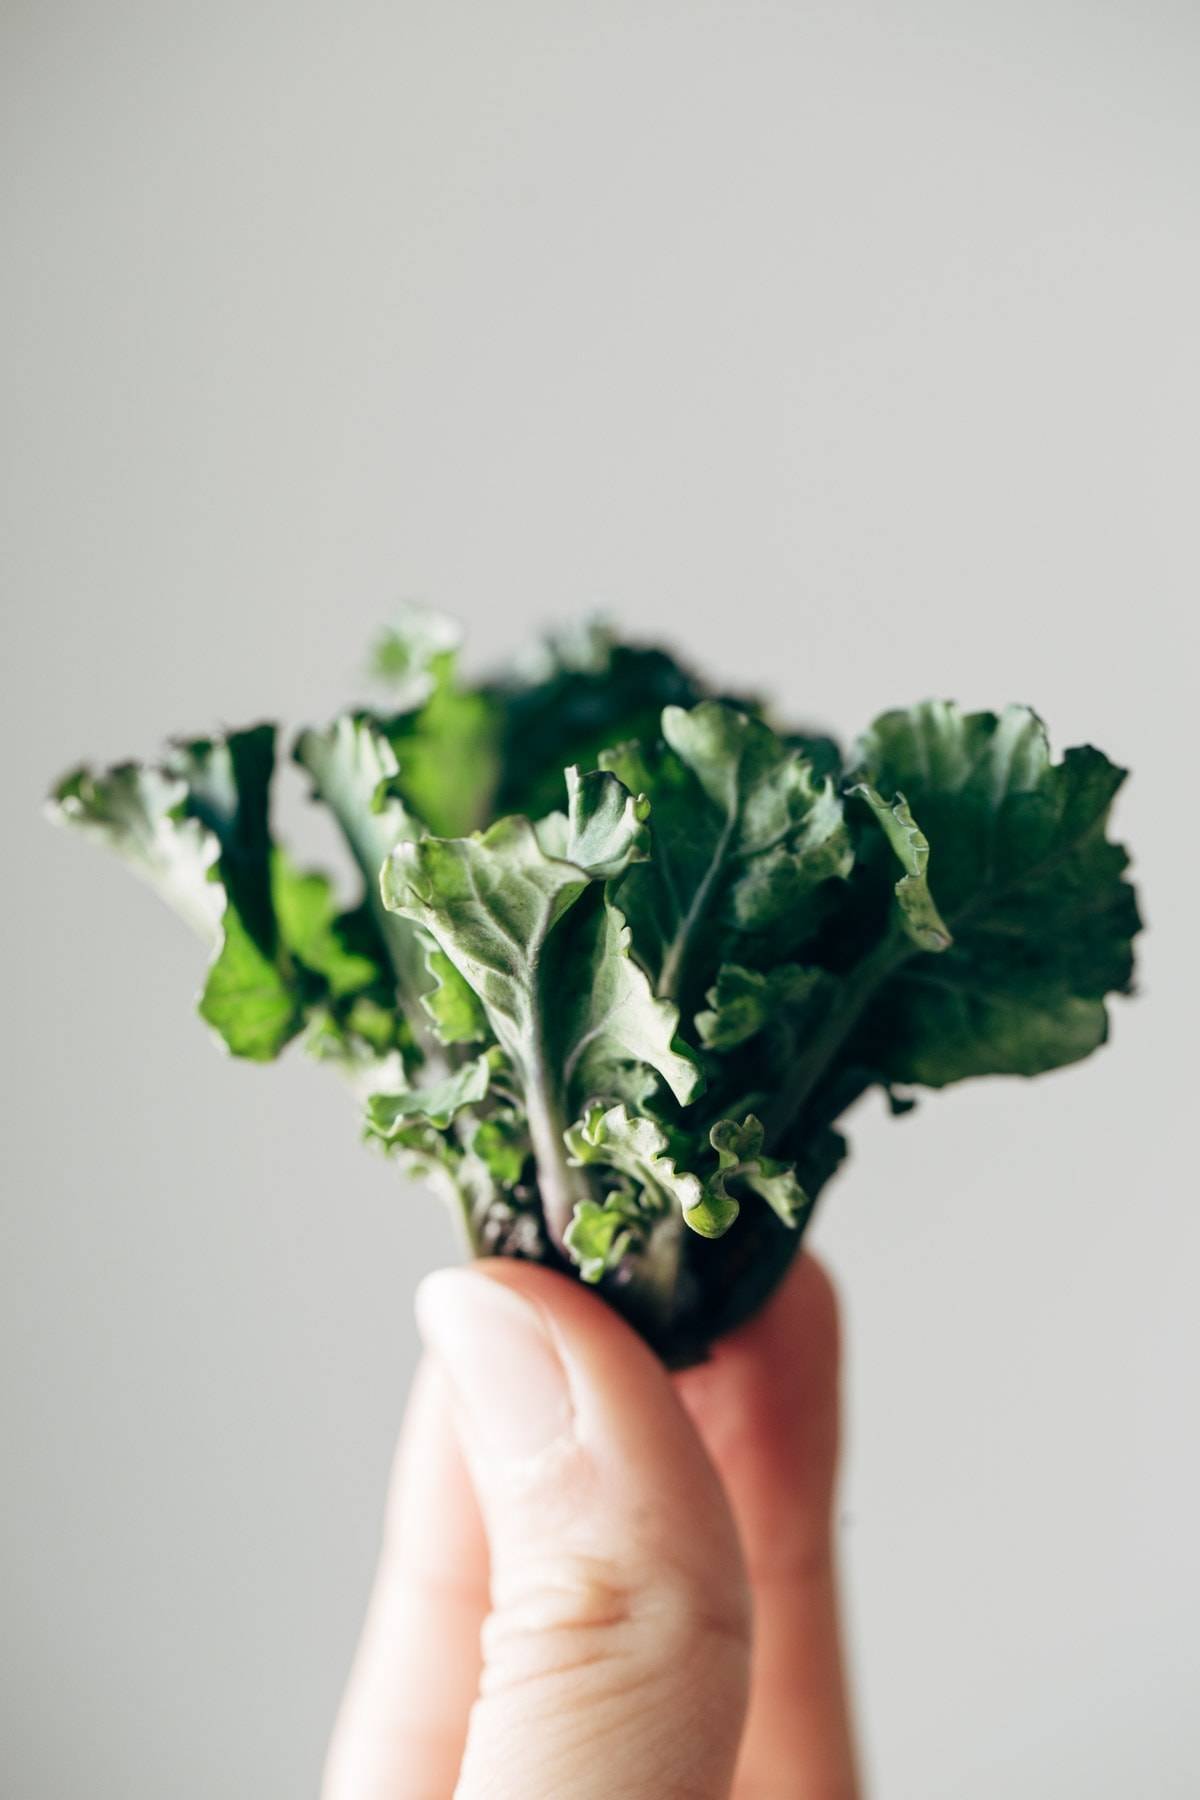 Fingers holding pieces of kale.